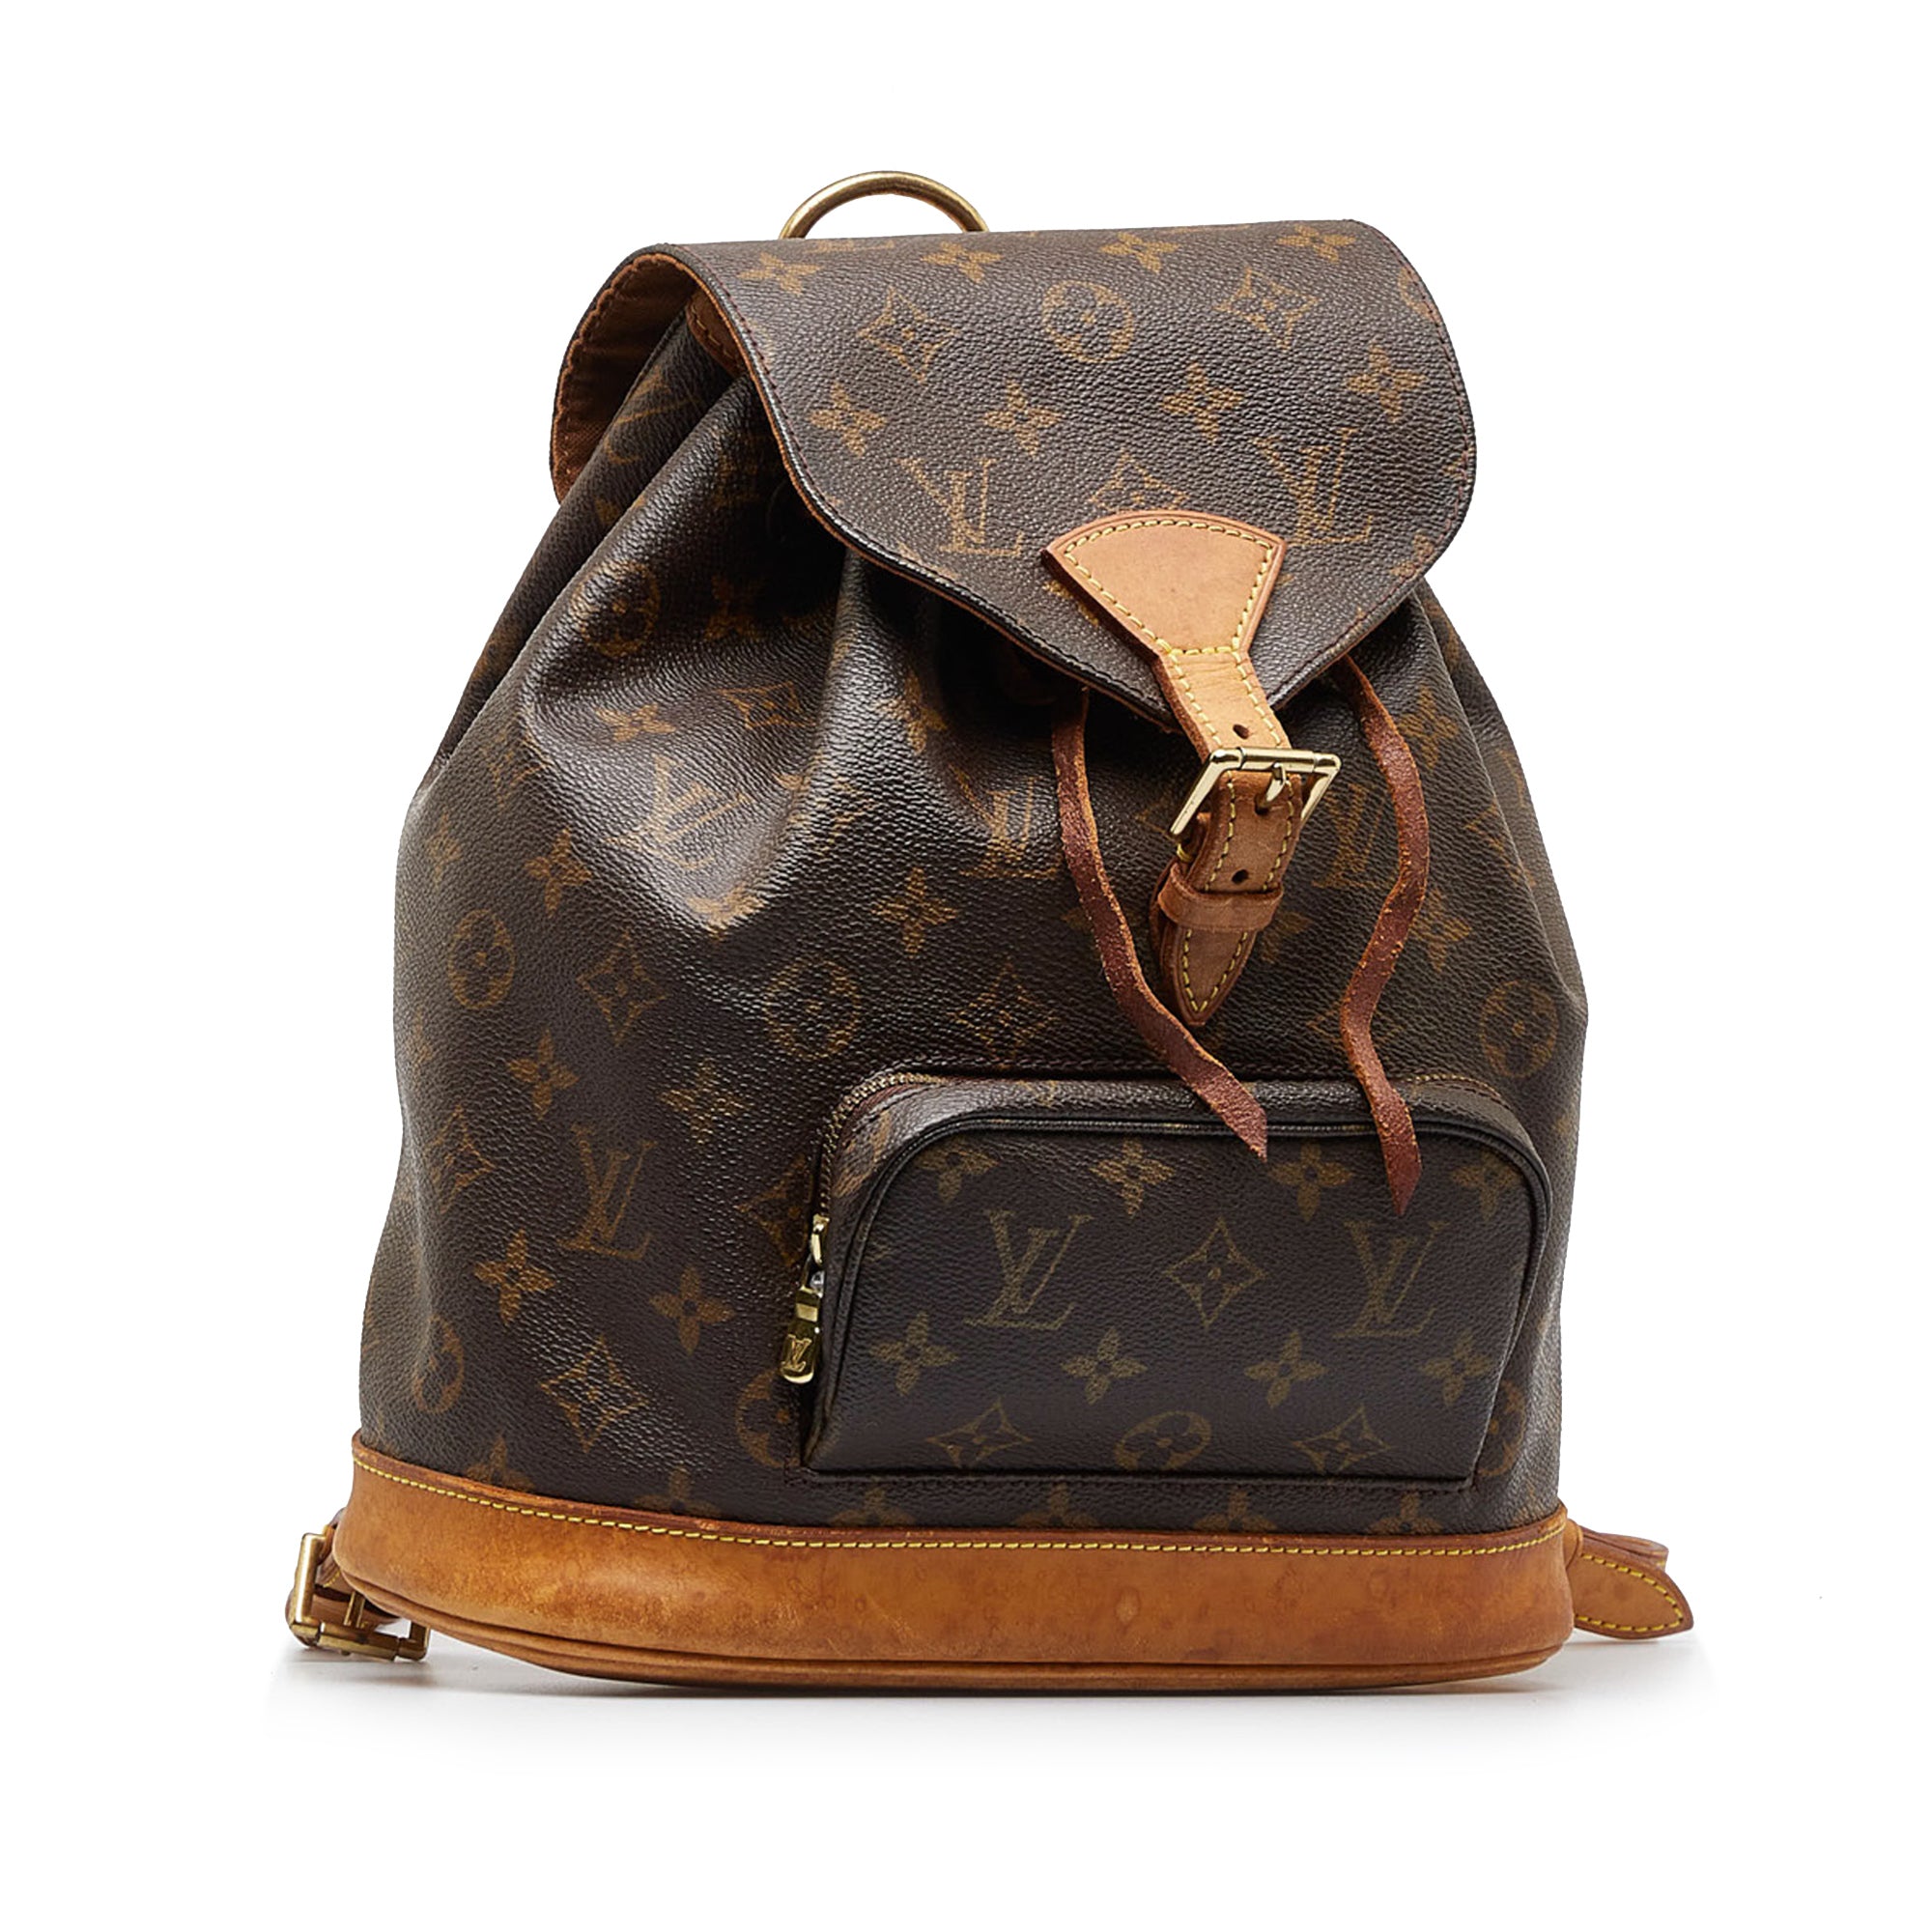 Montsouris MM Backpack (Authentic Pre-Owned)  Unisex bag, Brown backpacks, Louis  vuitton monogram